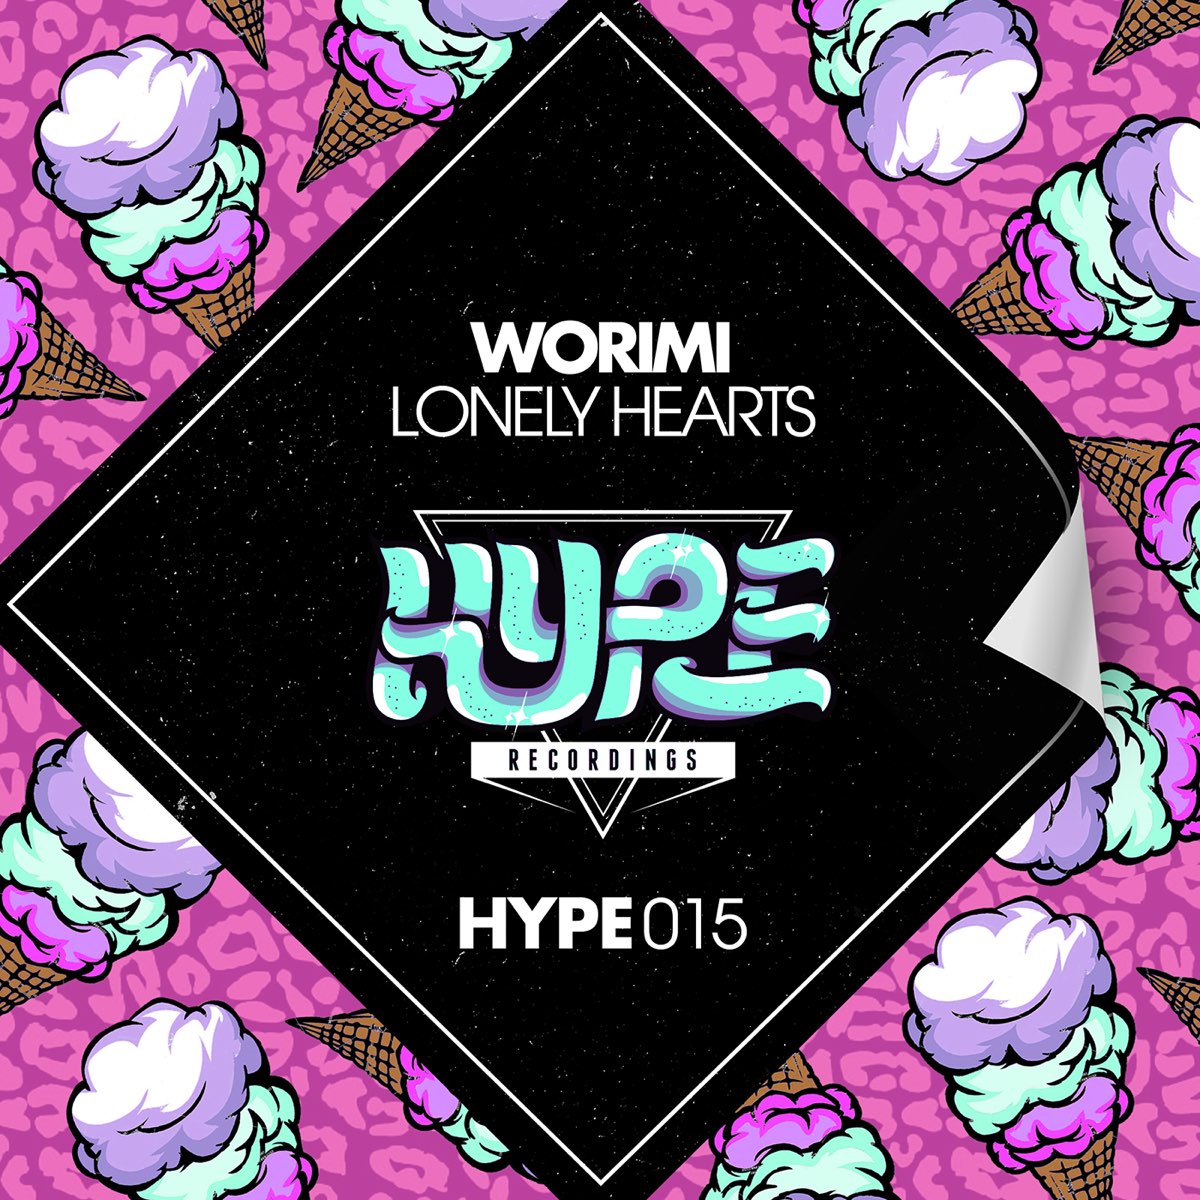 Hype Labels. Lonely Heart Original Mix Synthetic Fantasy.